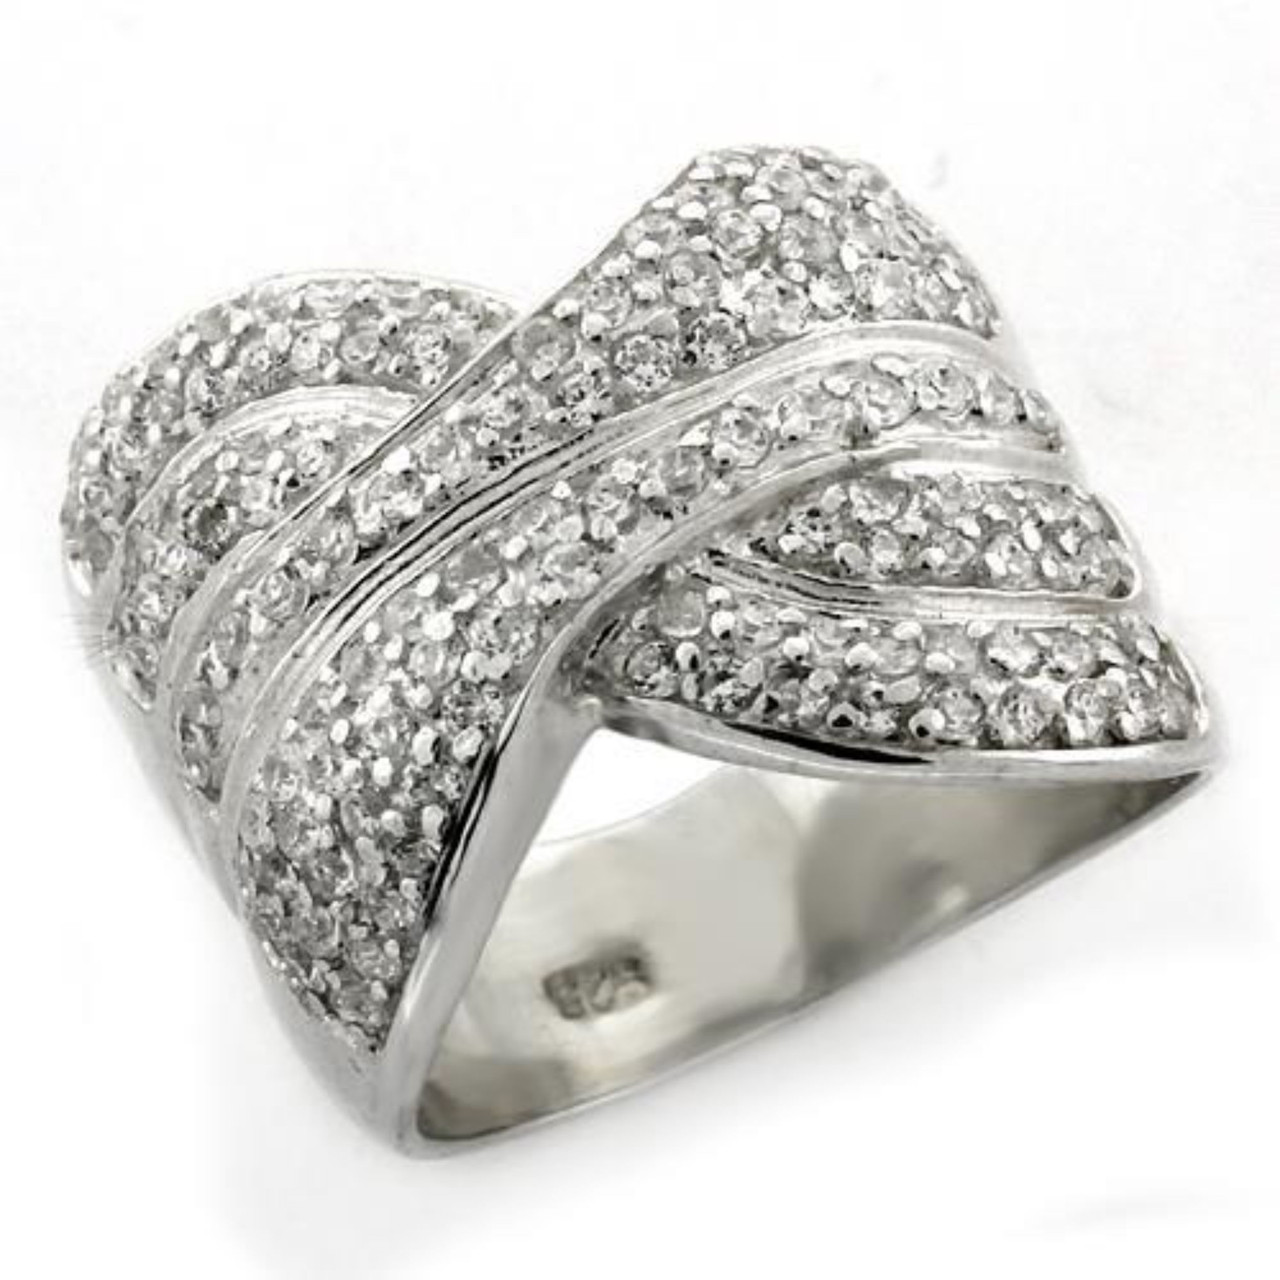 Sterling Silver Women's Ring with Round Cubic Zirconia Stones